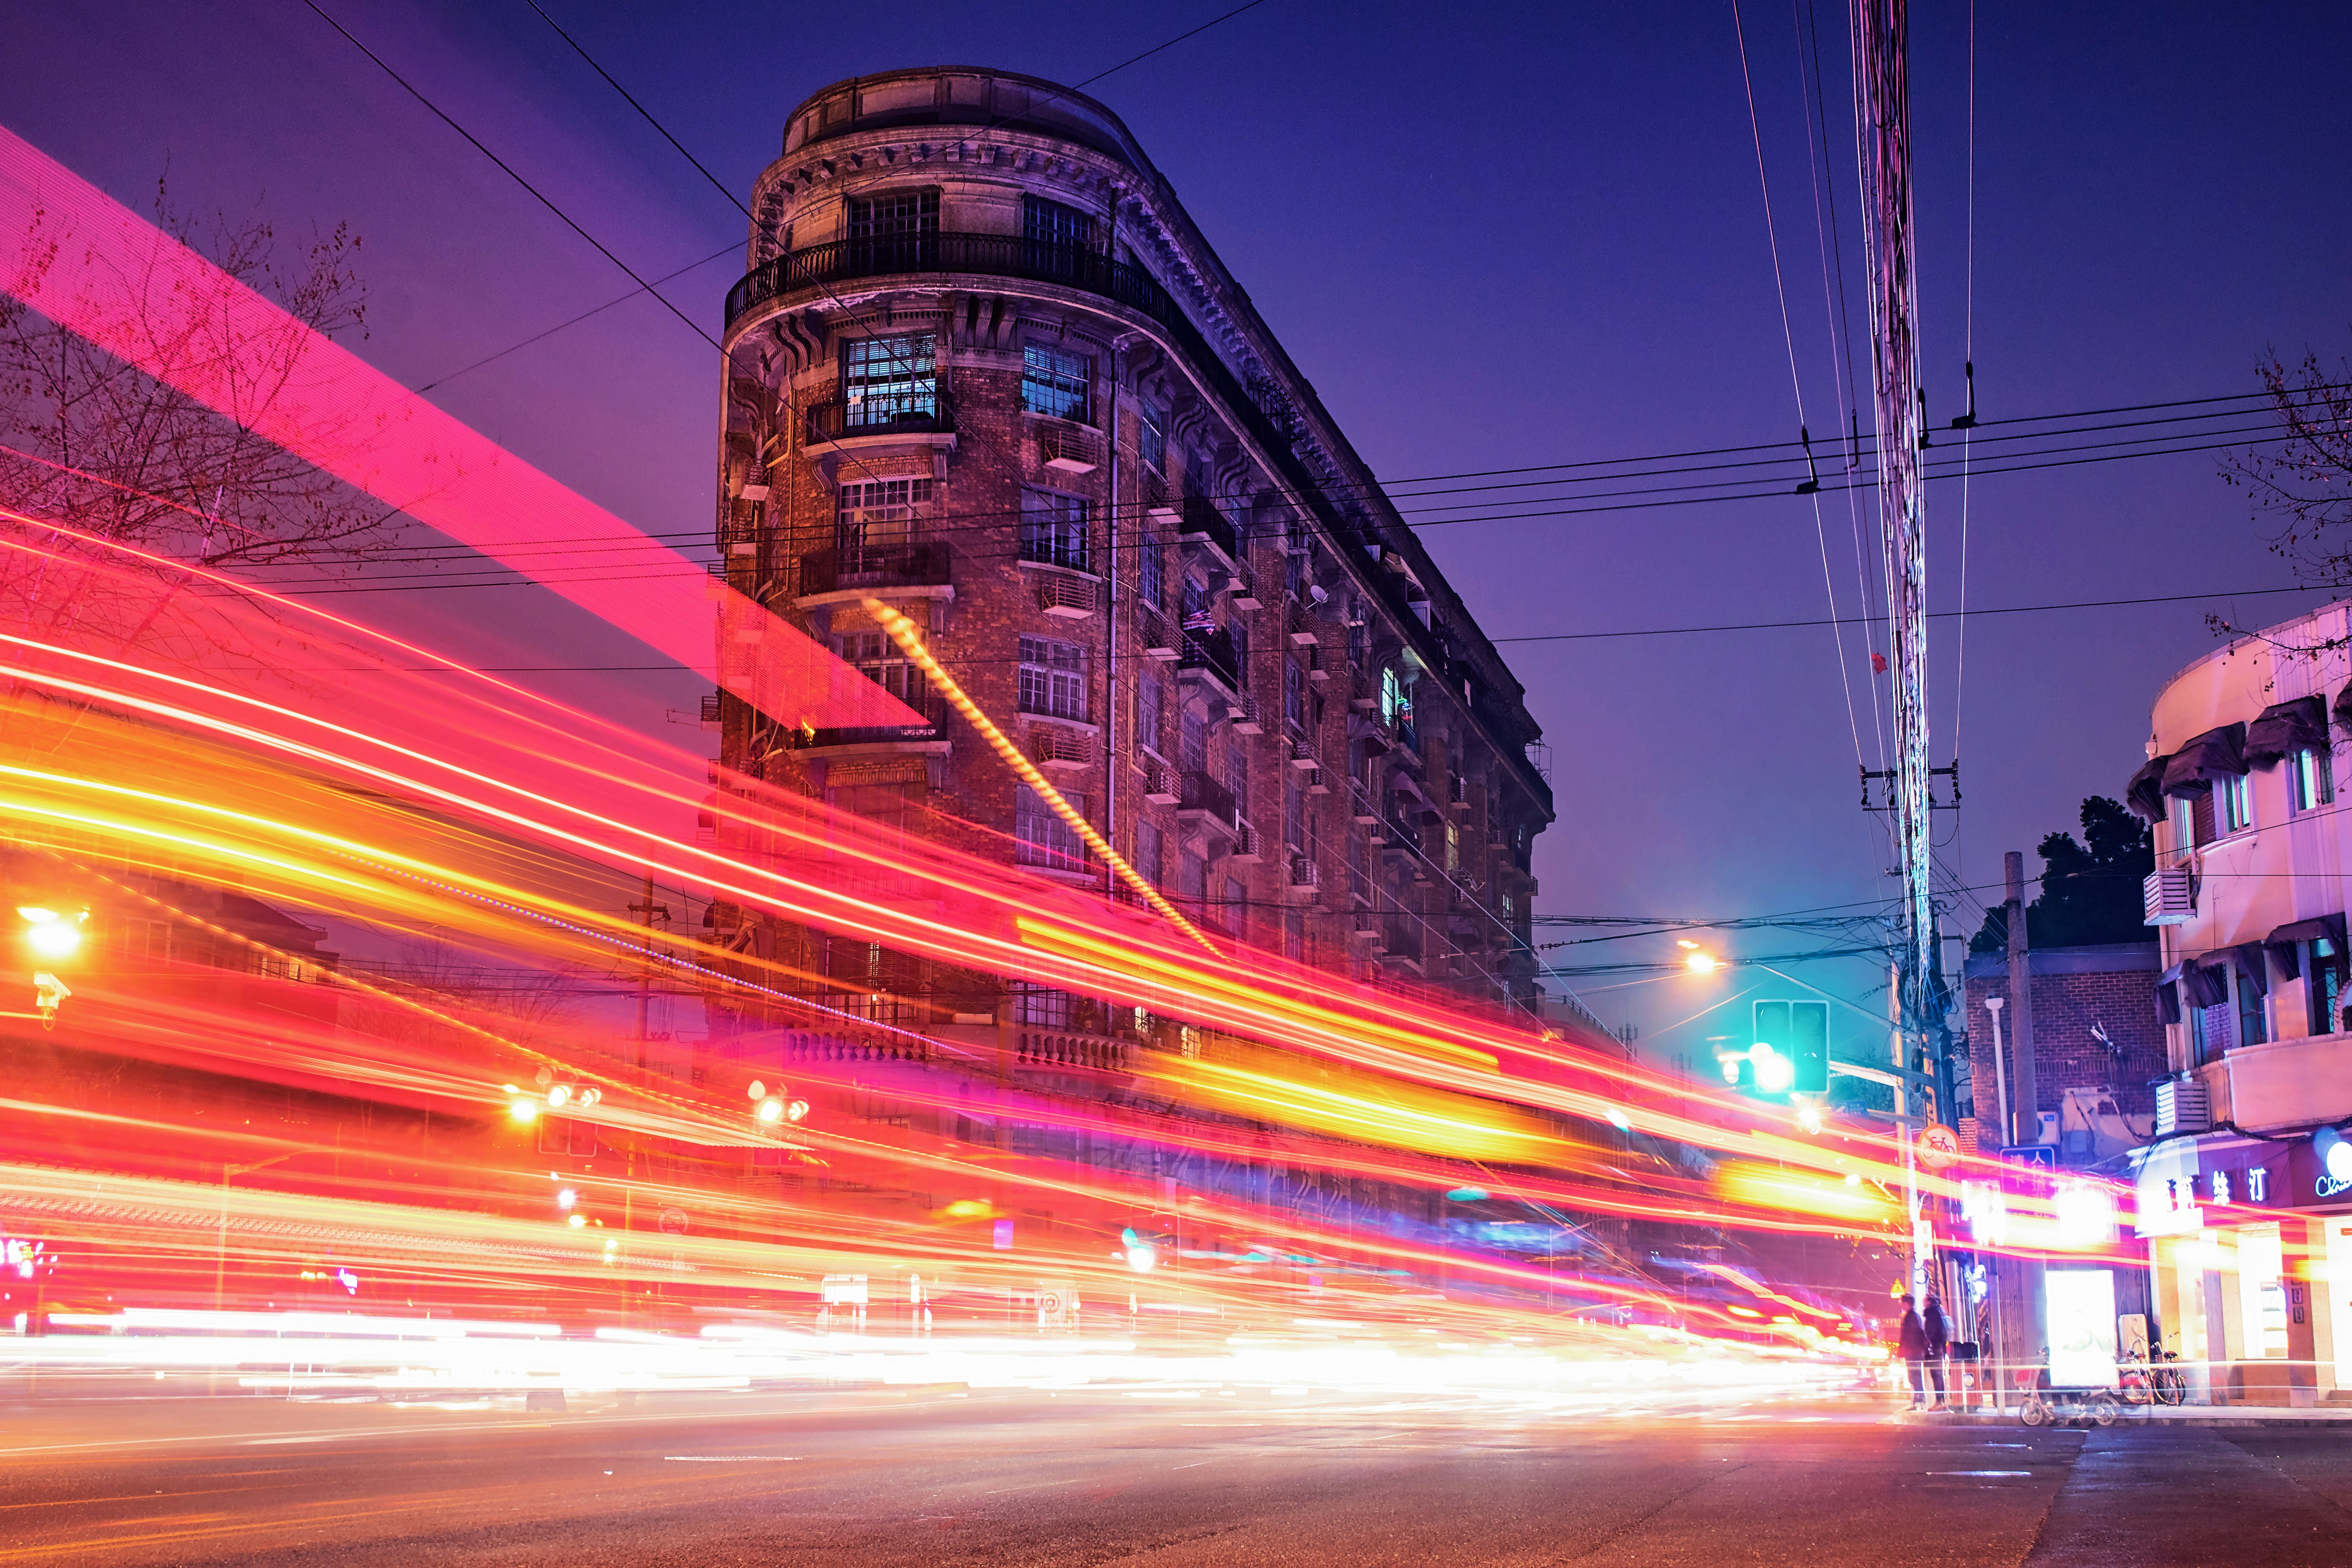 time-lapse photography of cars passing through the road between buildings during night time